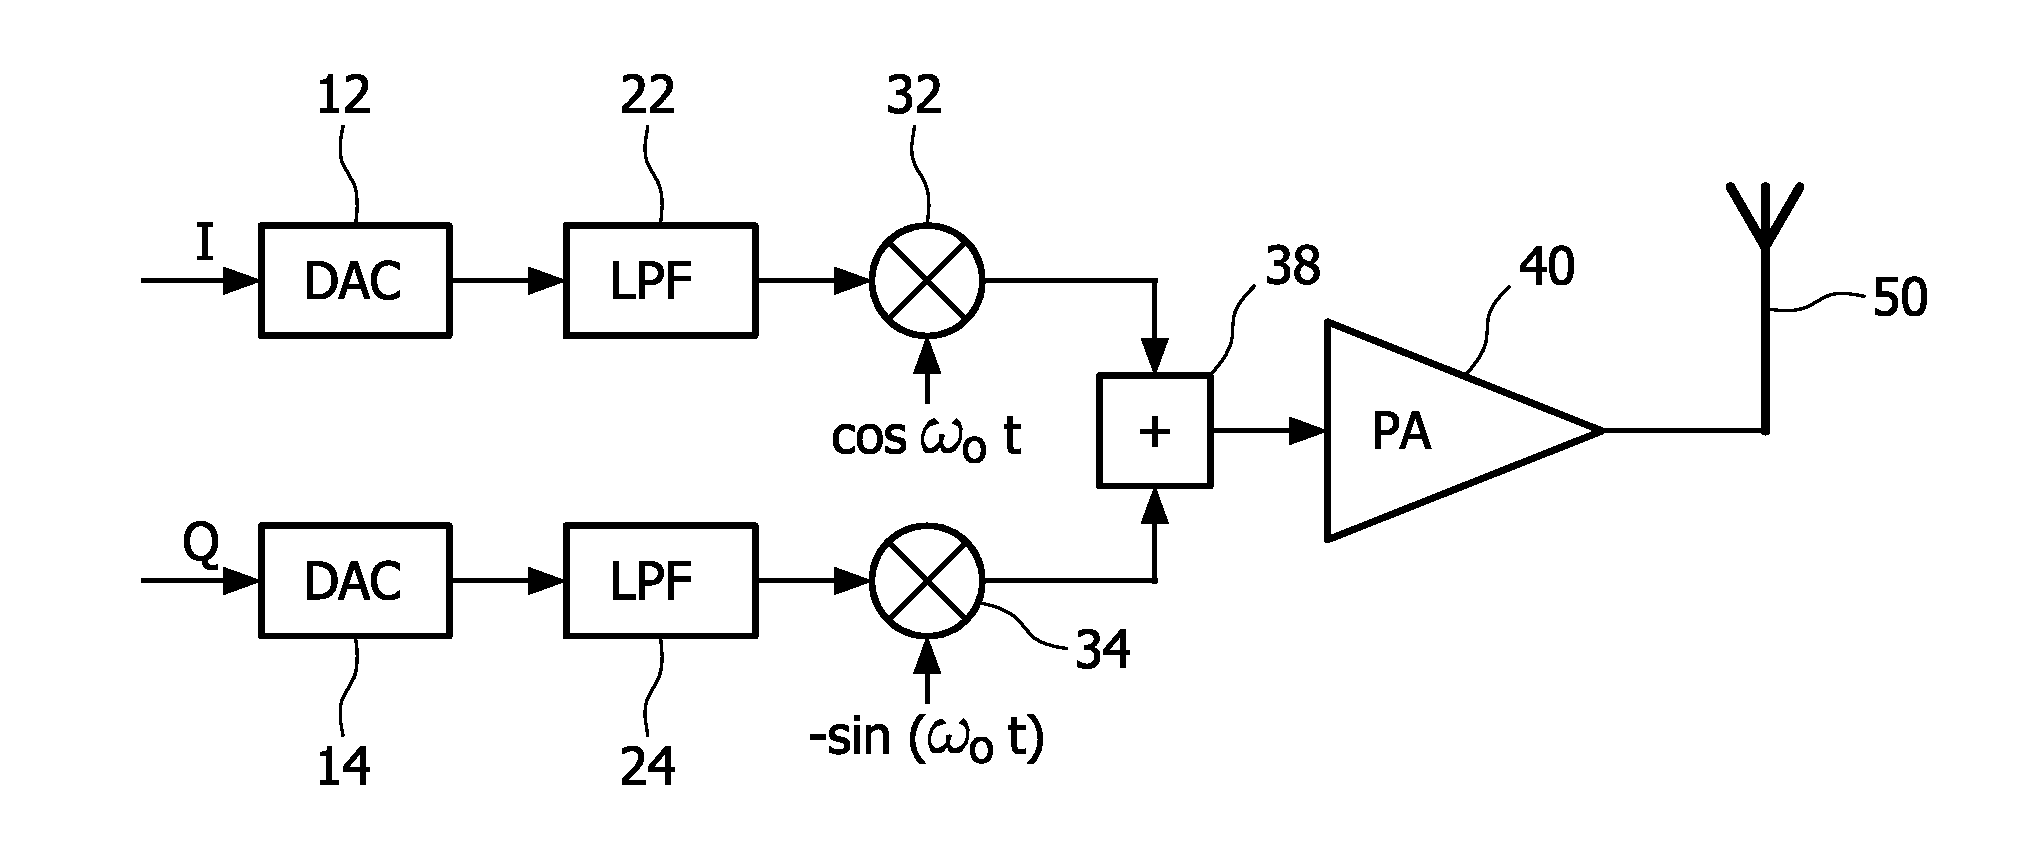 Multiple transmission apparatus with reduced coupling